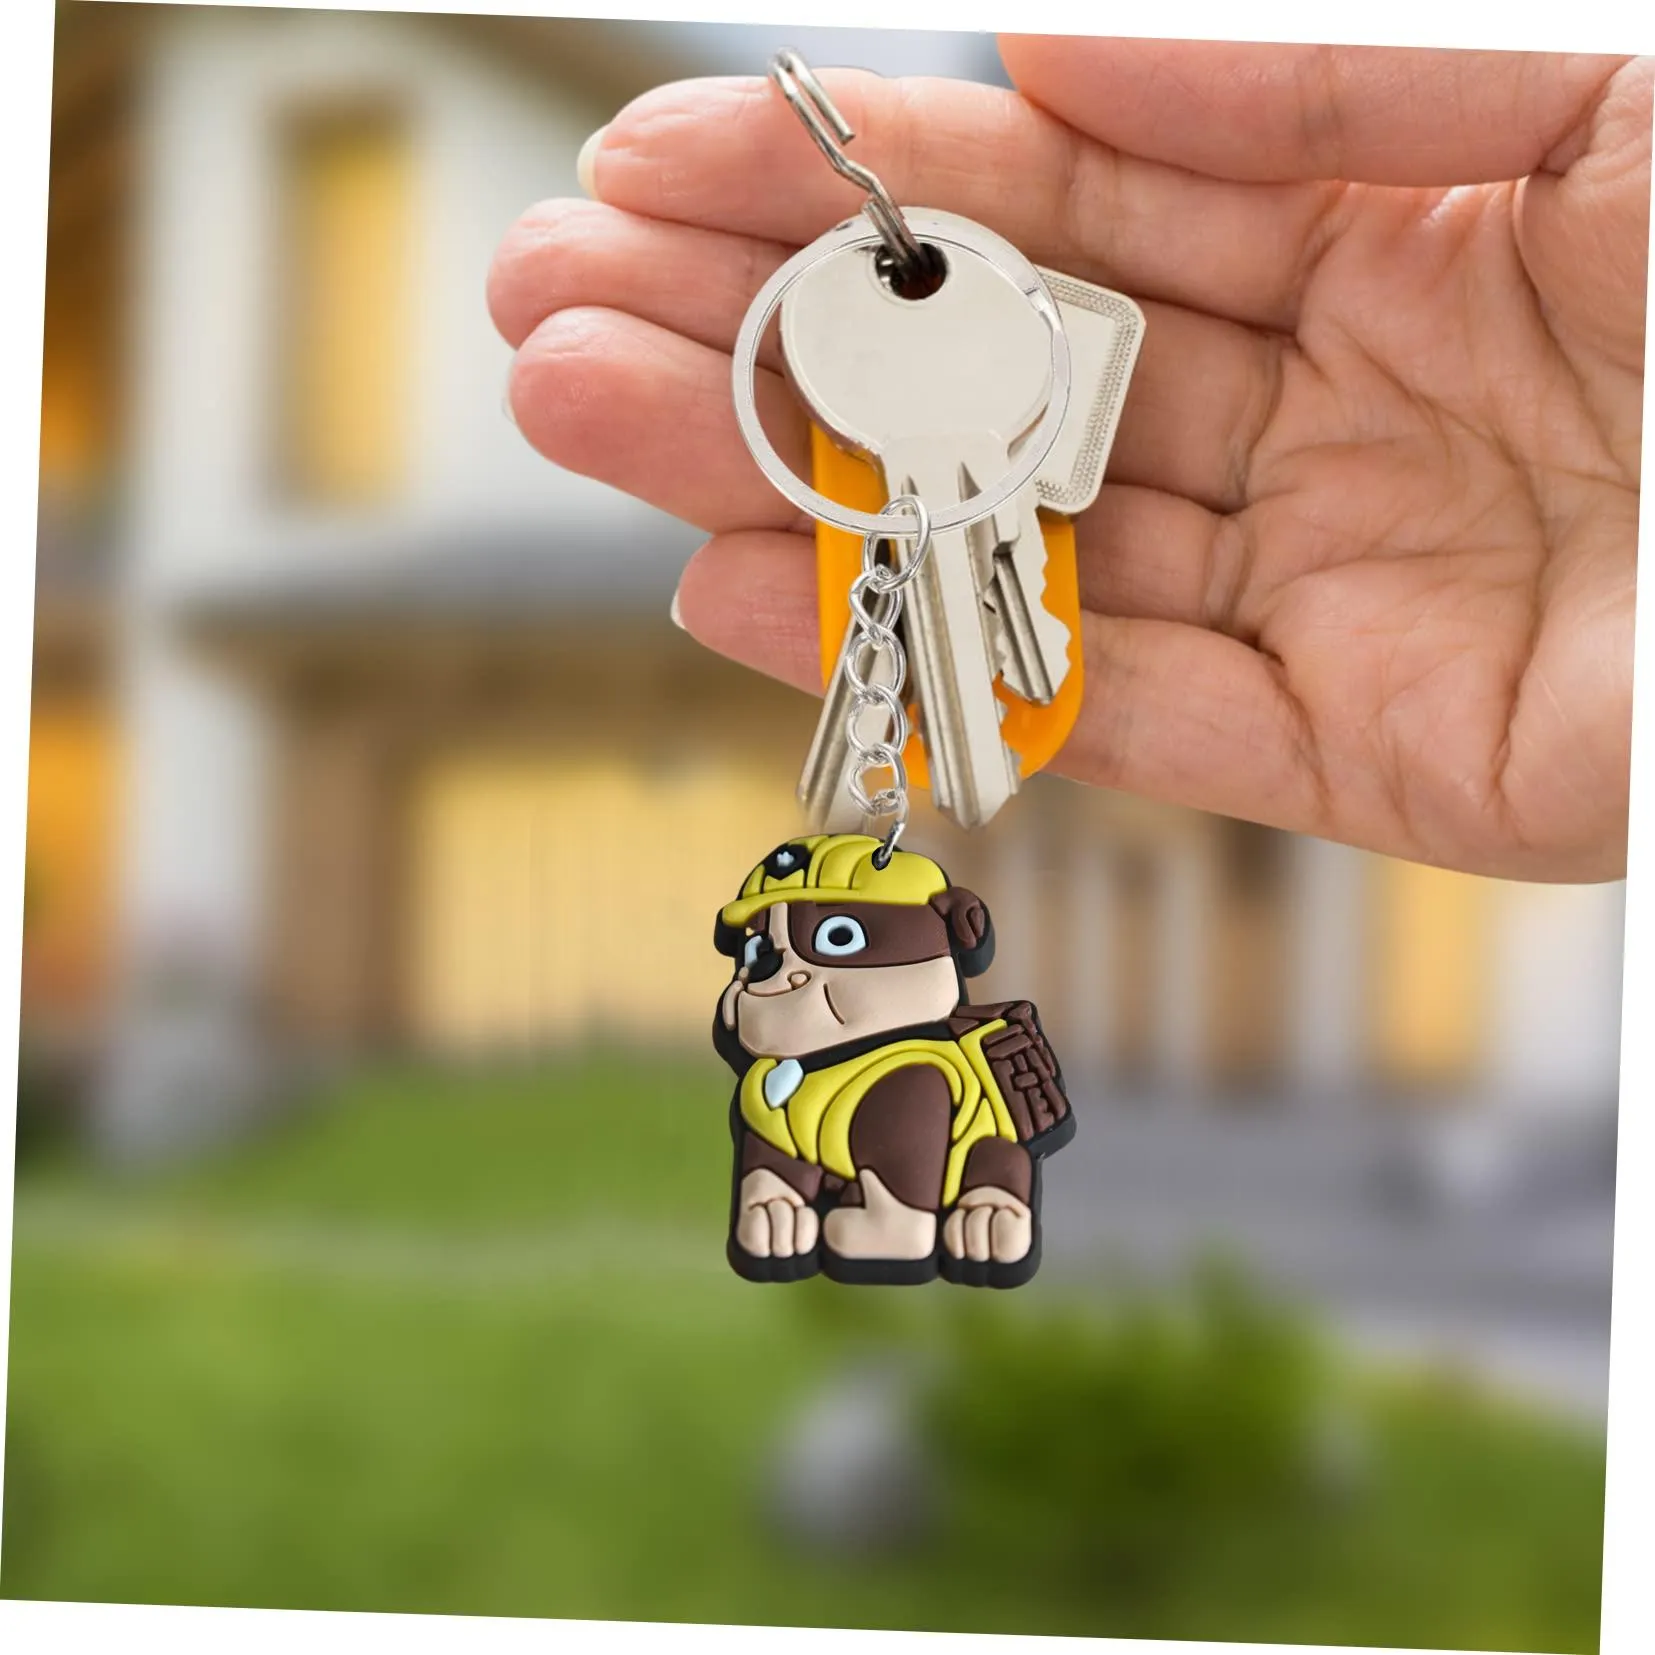 new wang team keychain for classroom prizes car bag keyring keychains backpack suitable schoolbag goodie stuffers supplies school bags